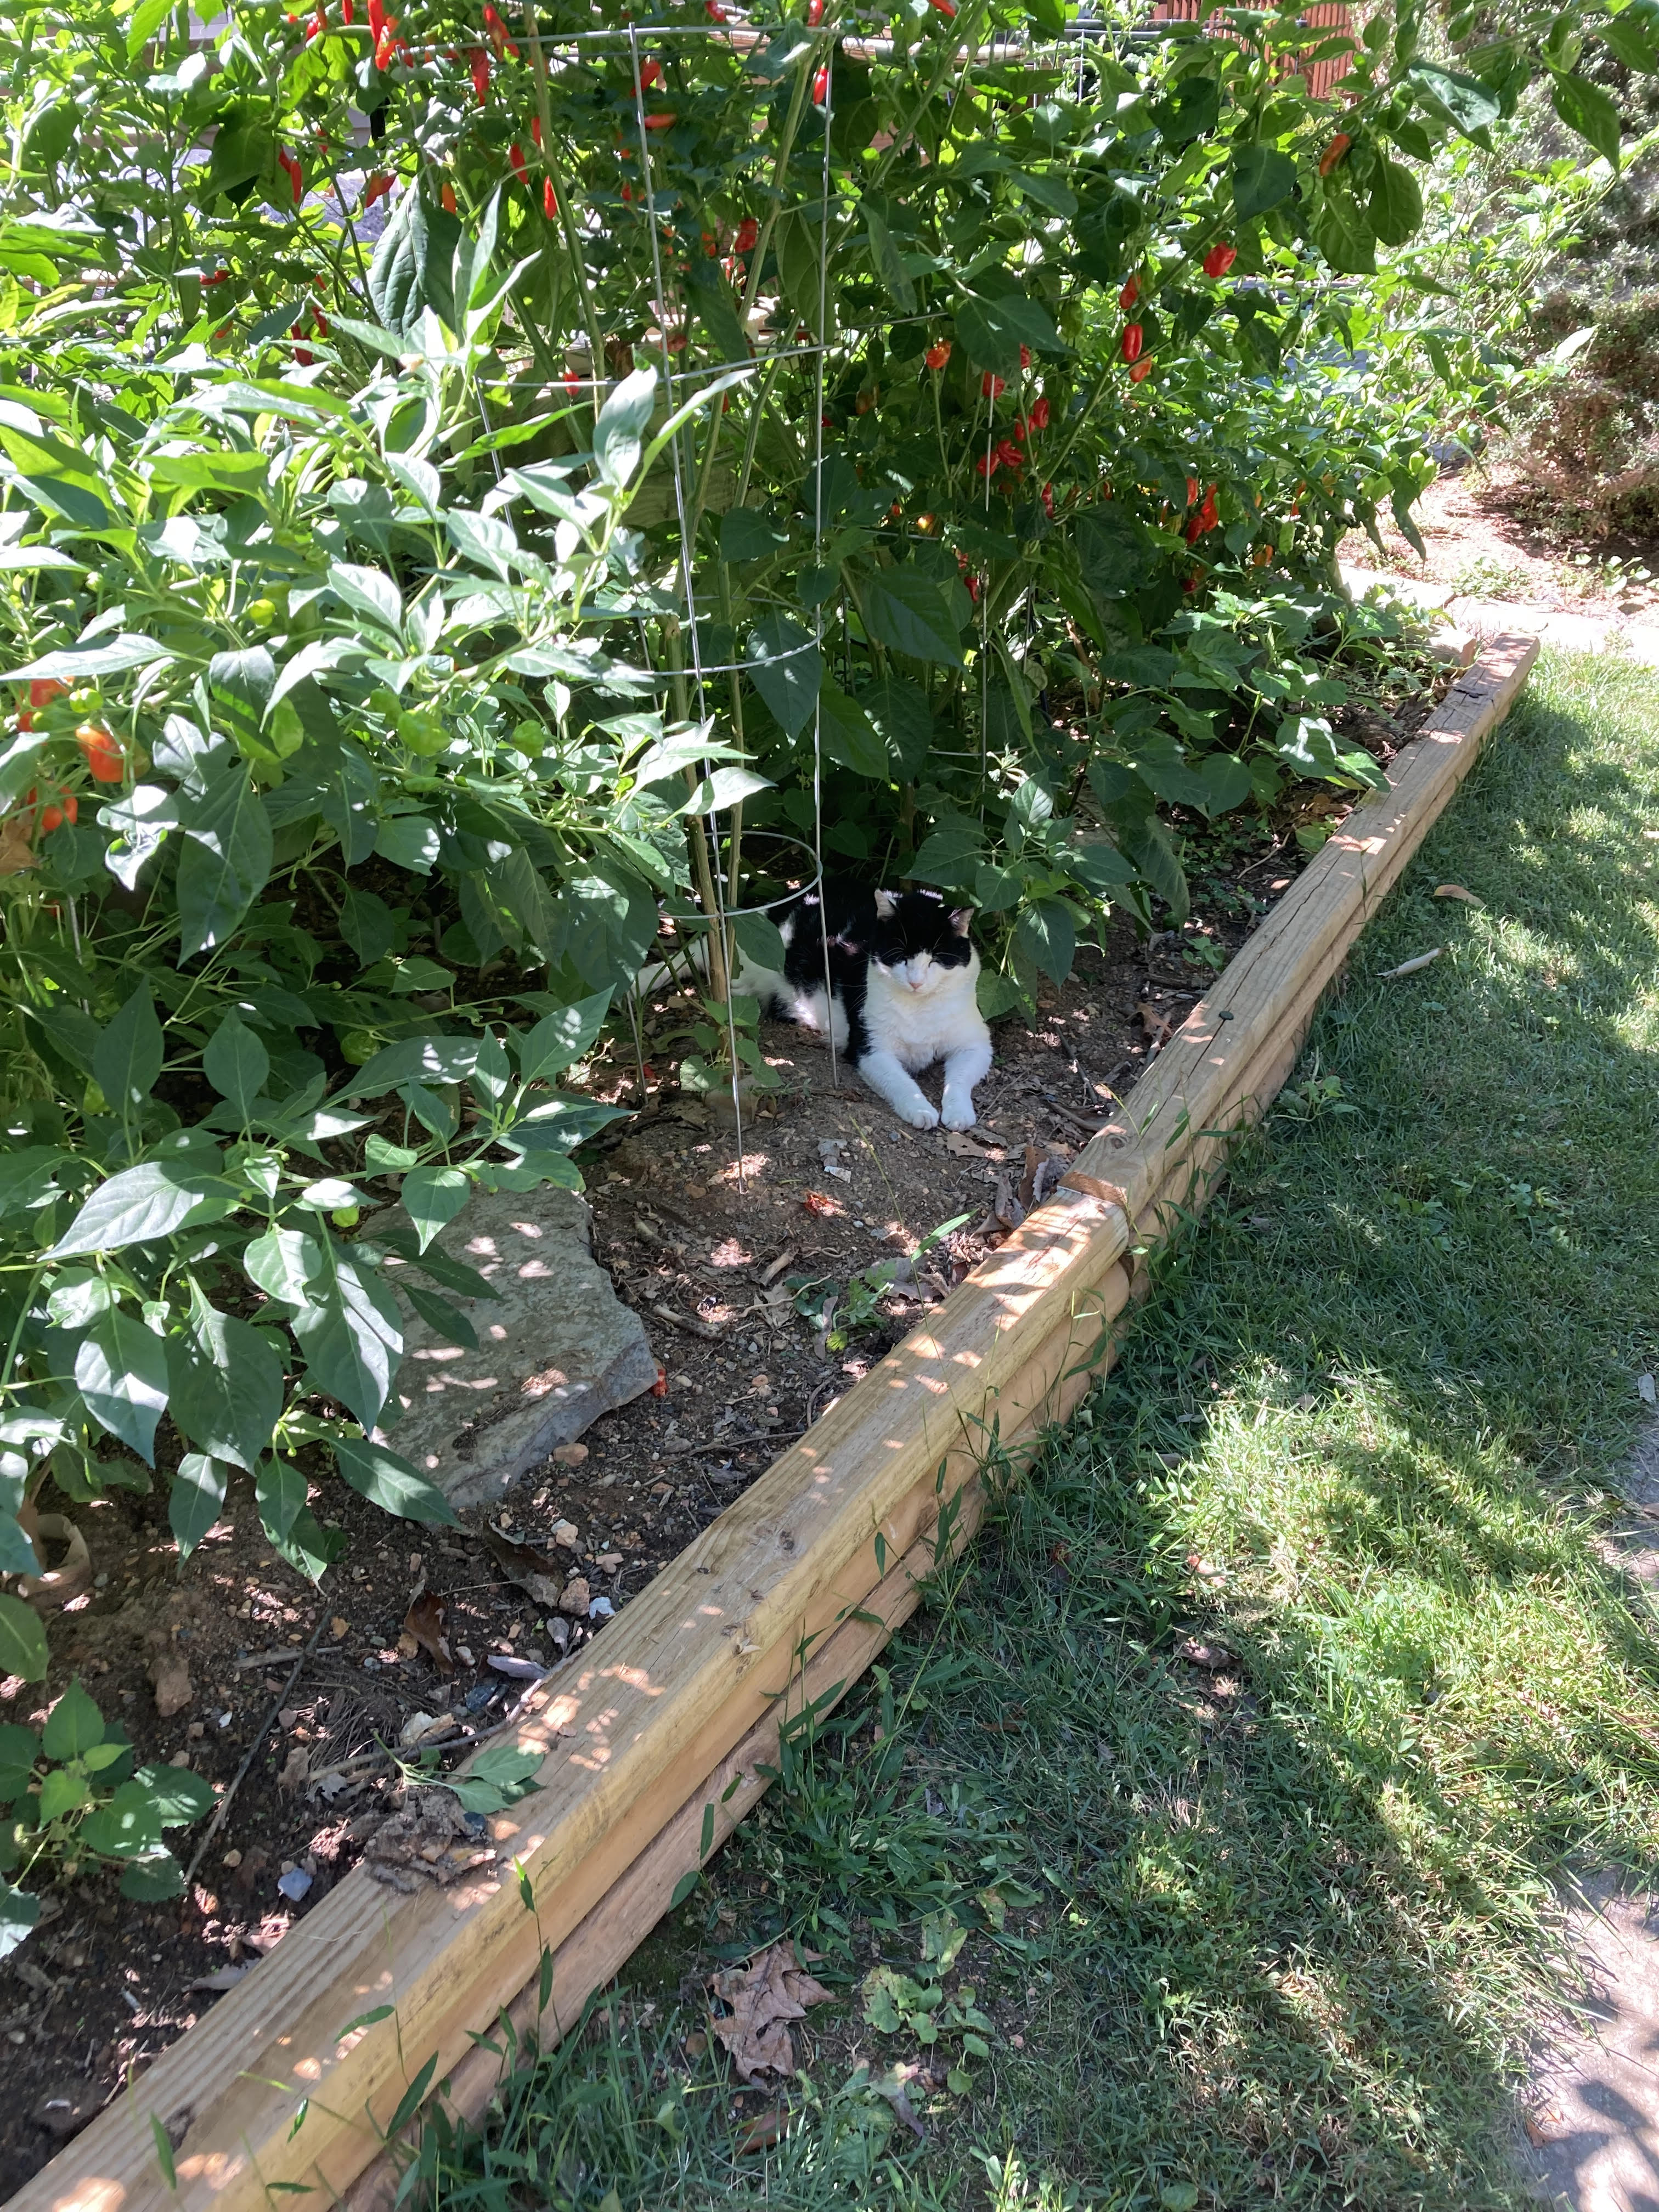 image peppers growing with cat guarding